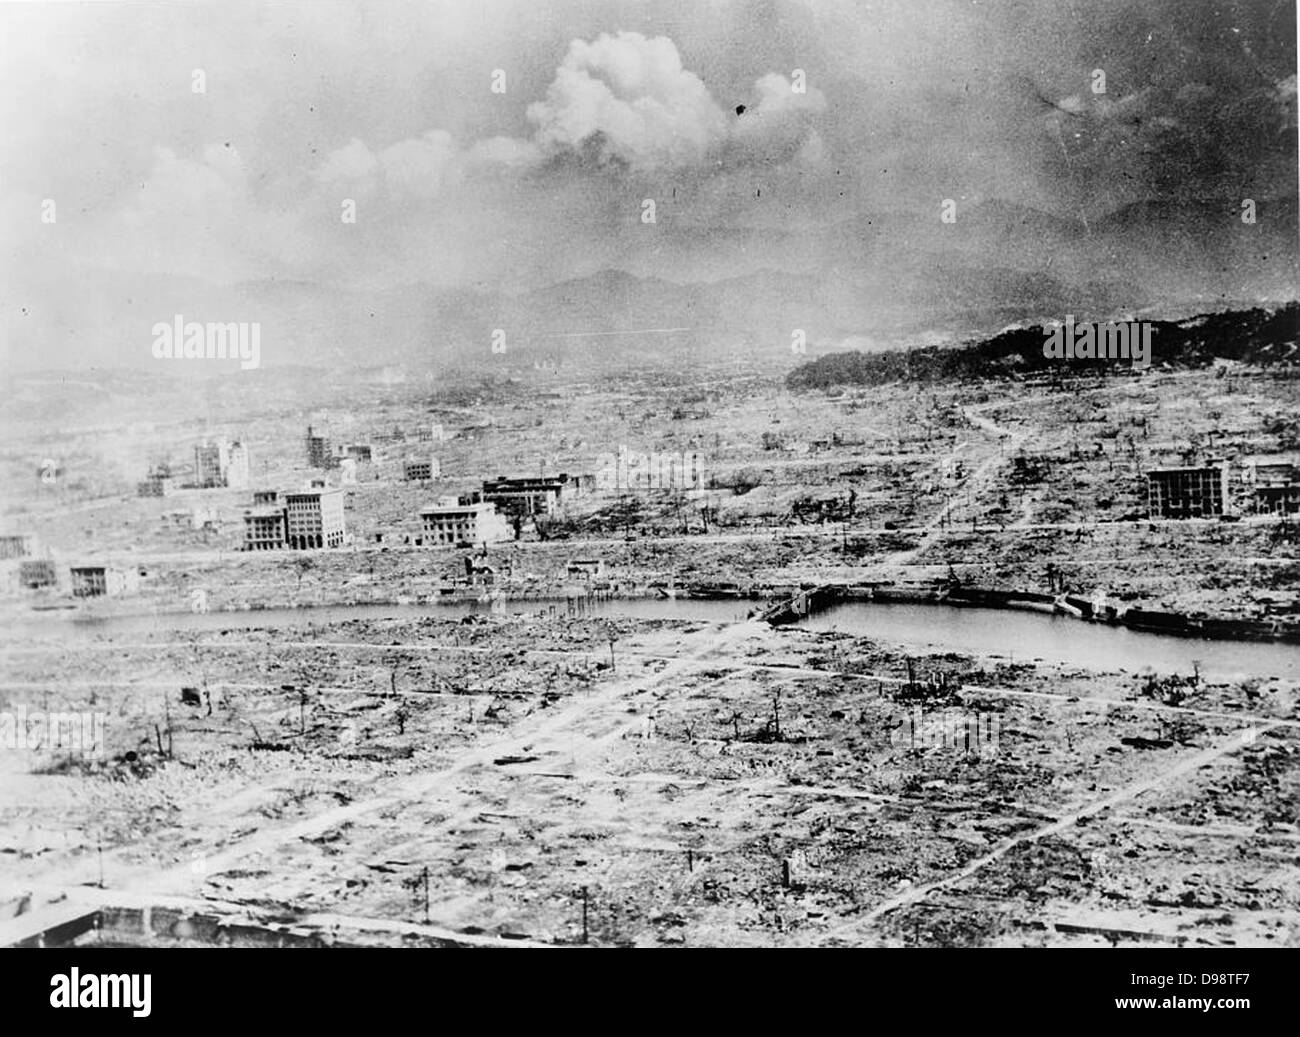 World War II 1939-1945: View of the city of Hiroshima, Japan, after the explosion of the atomic bomb, 6 August 1945. US Army photograph. Warfare Nuclear Ruins Destruction Stock Photo